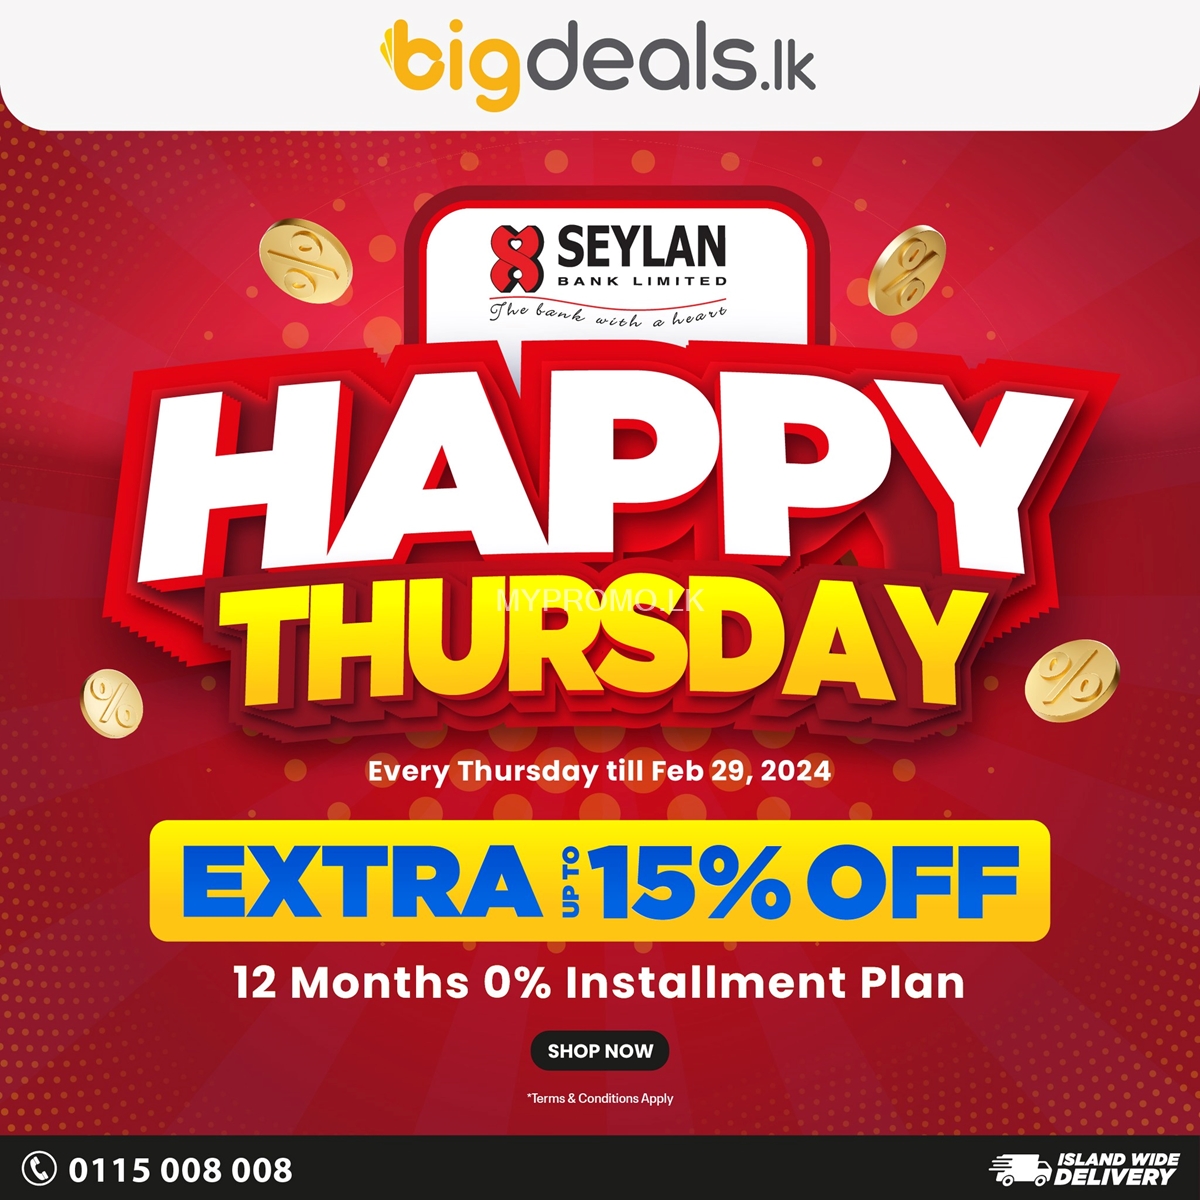 Save up to an extra 15% OFF with Seylan Bank Cards on Thursdays at BigDeals.lk